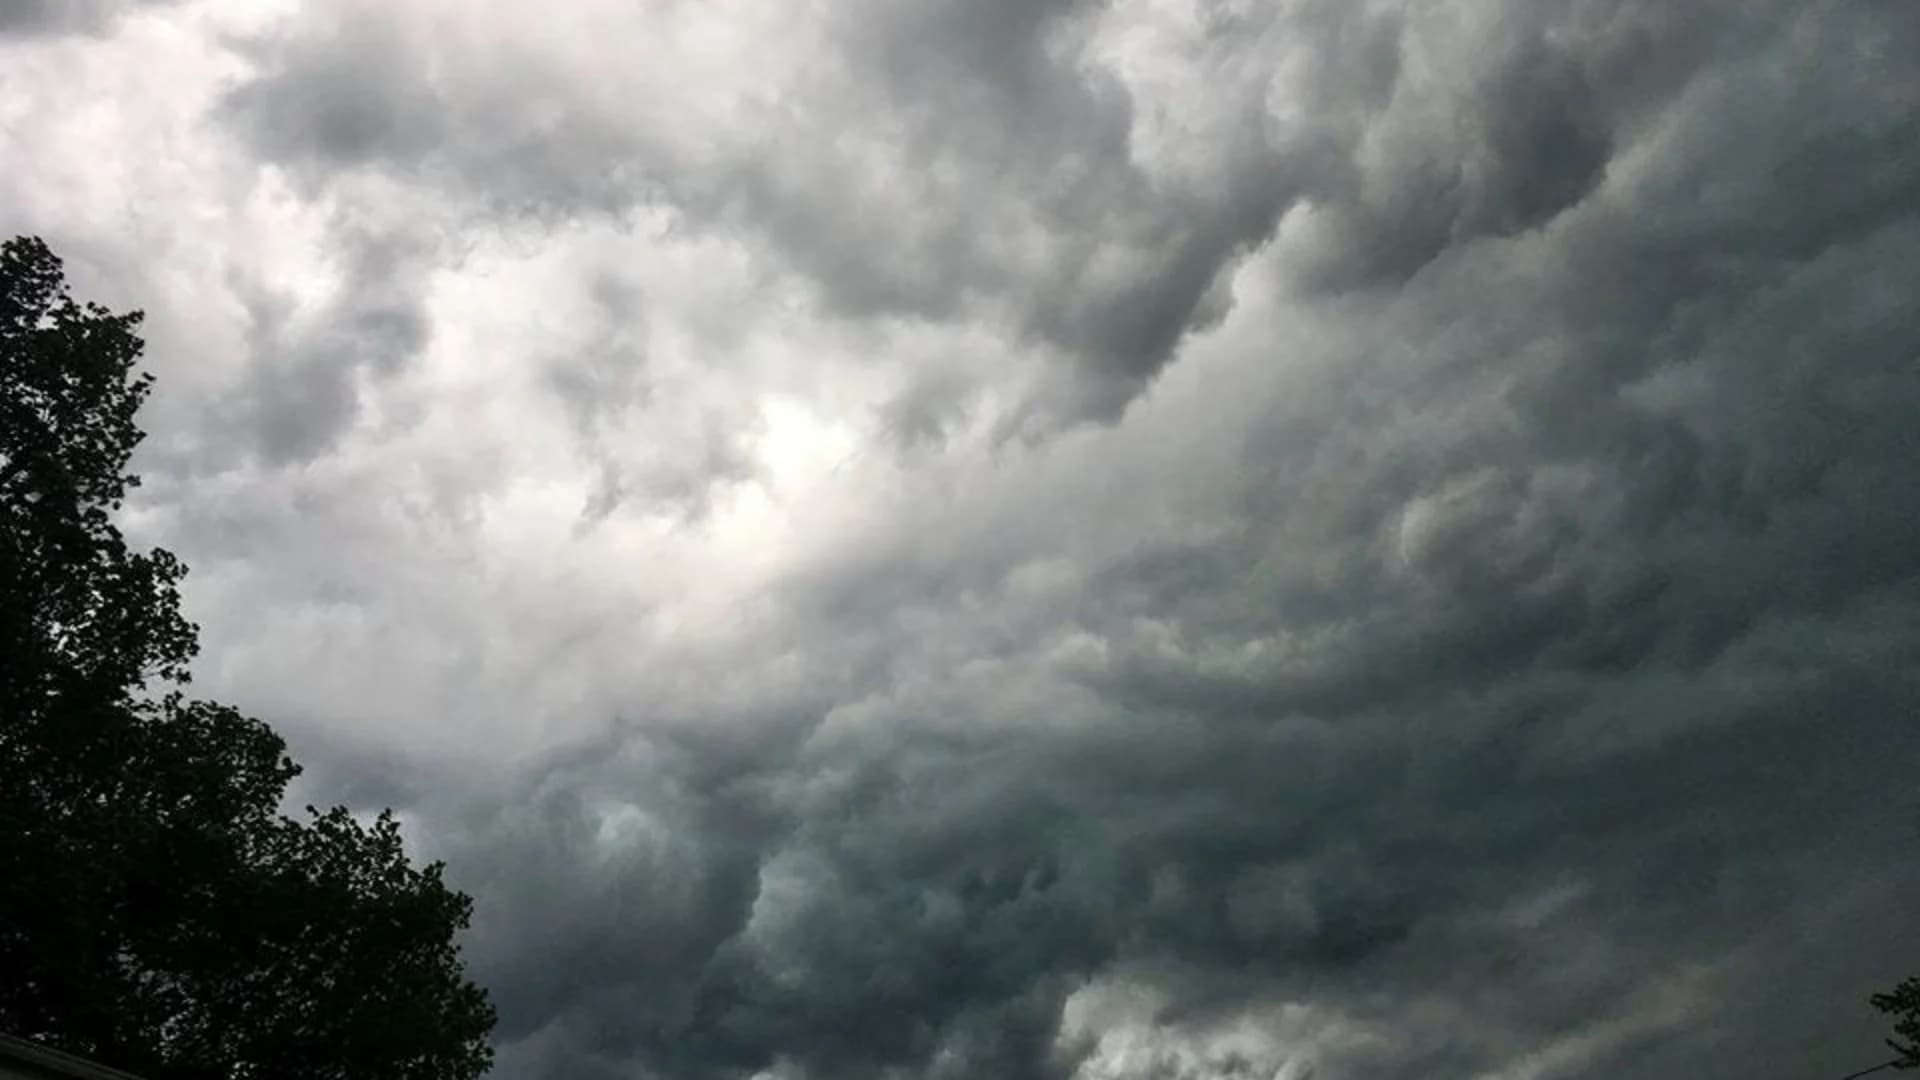 PHOTOS: Powerful May 15 thunderstorm in New Jersey